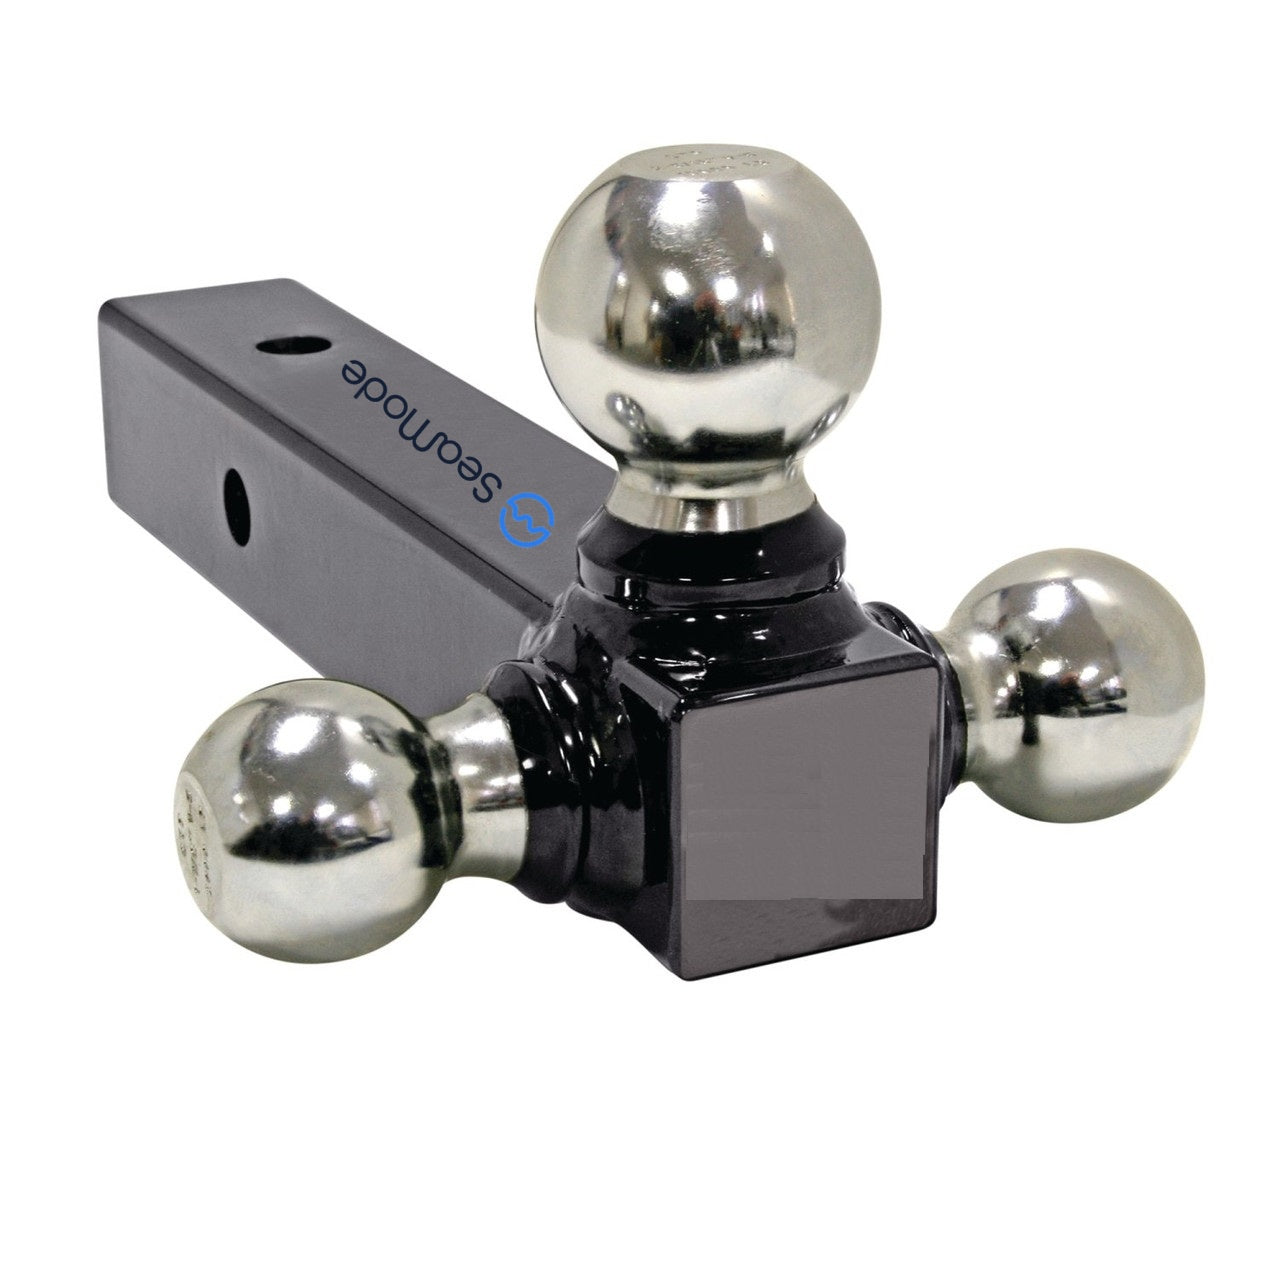 Tri Ball Hitch for 50 mm Receiver